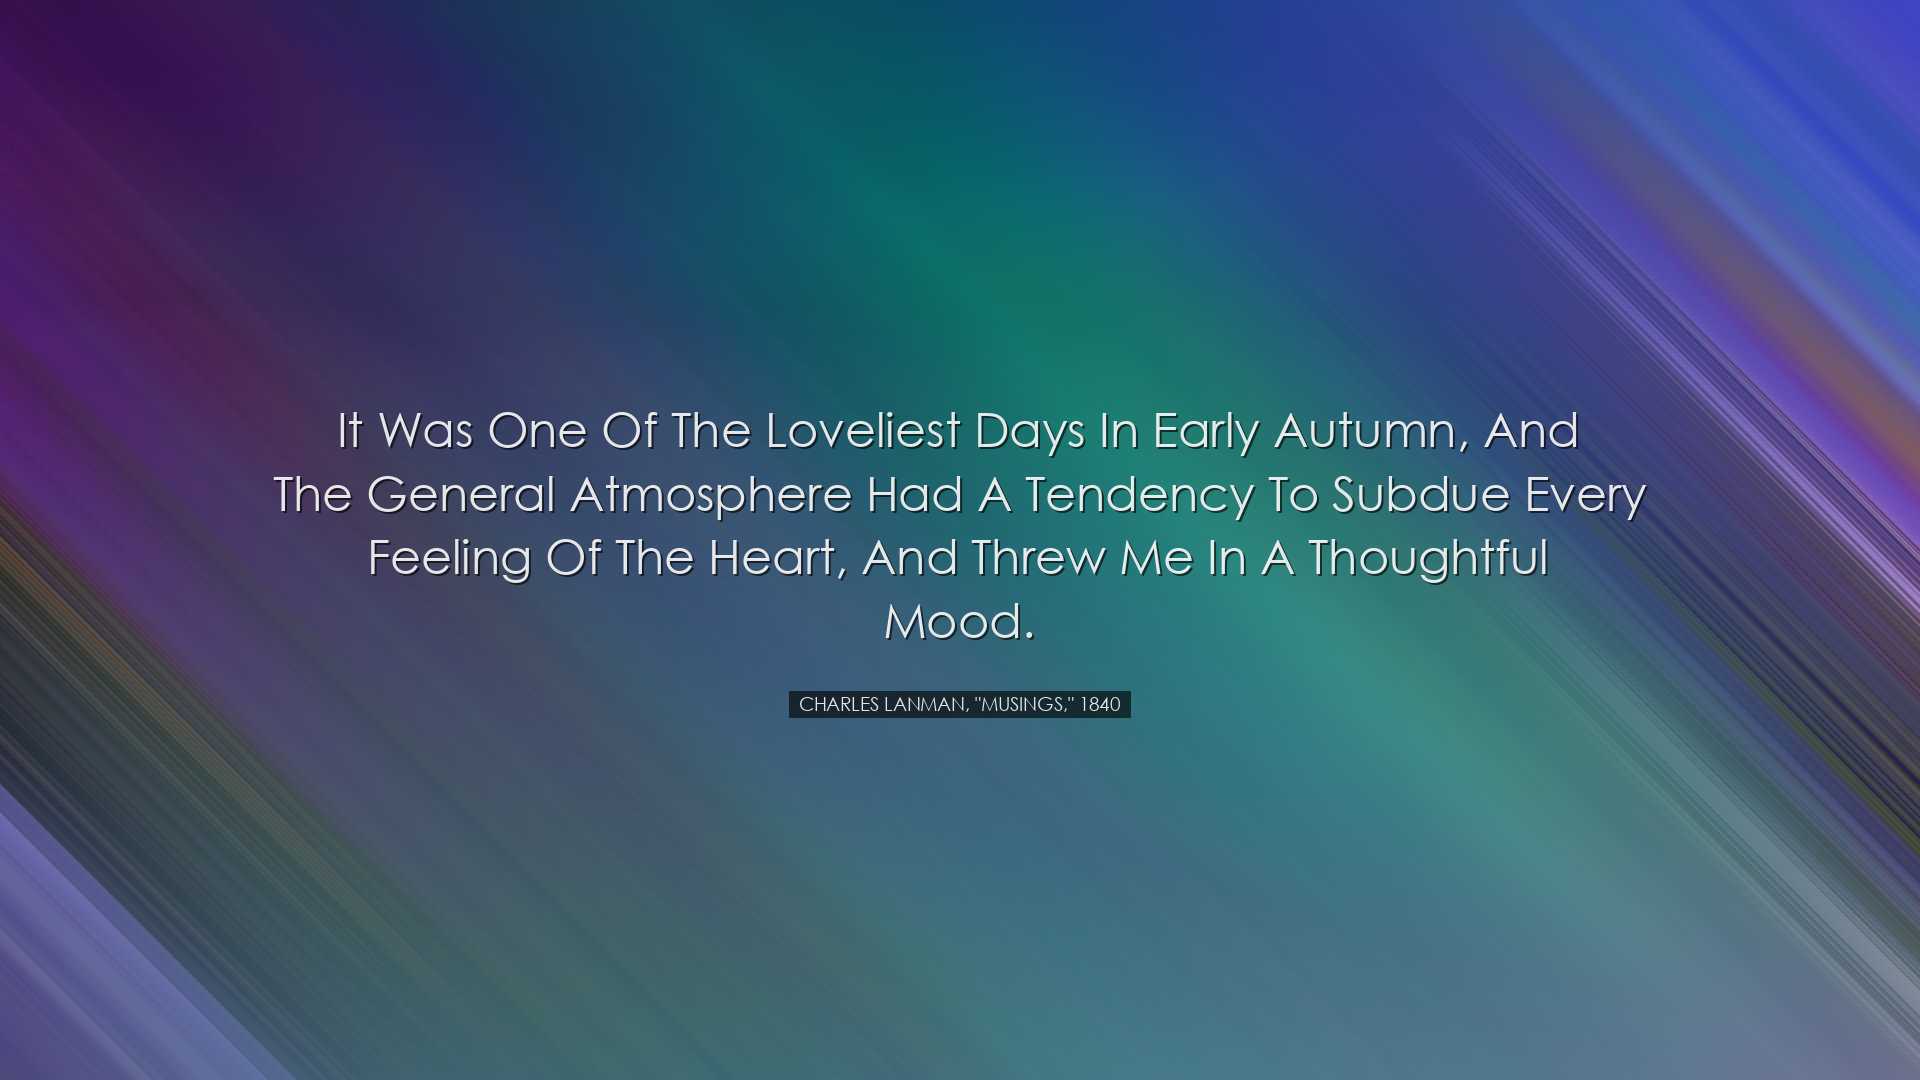 It was one of the loveliest days in early autumn, and the general